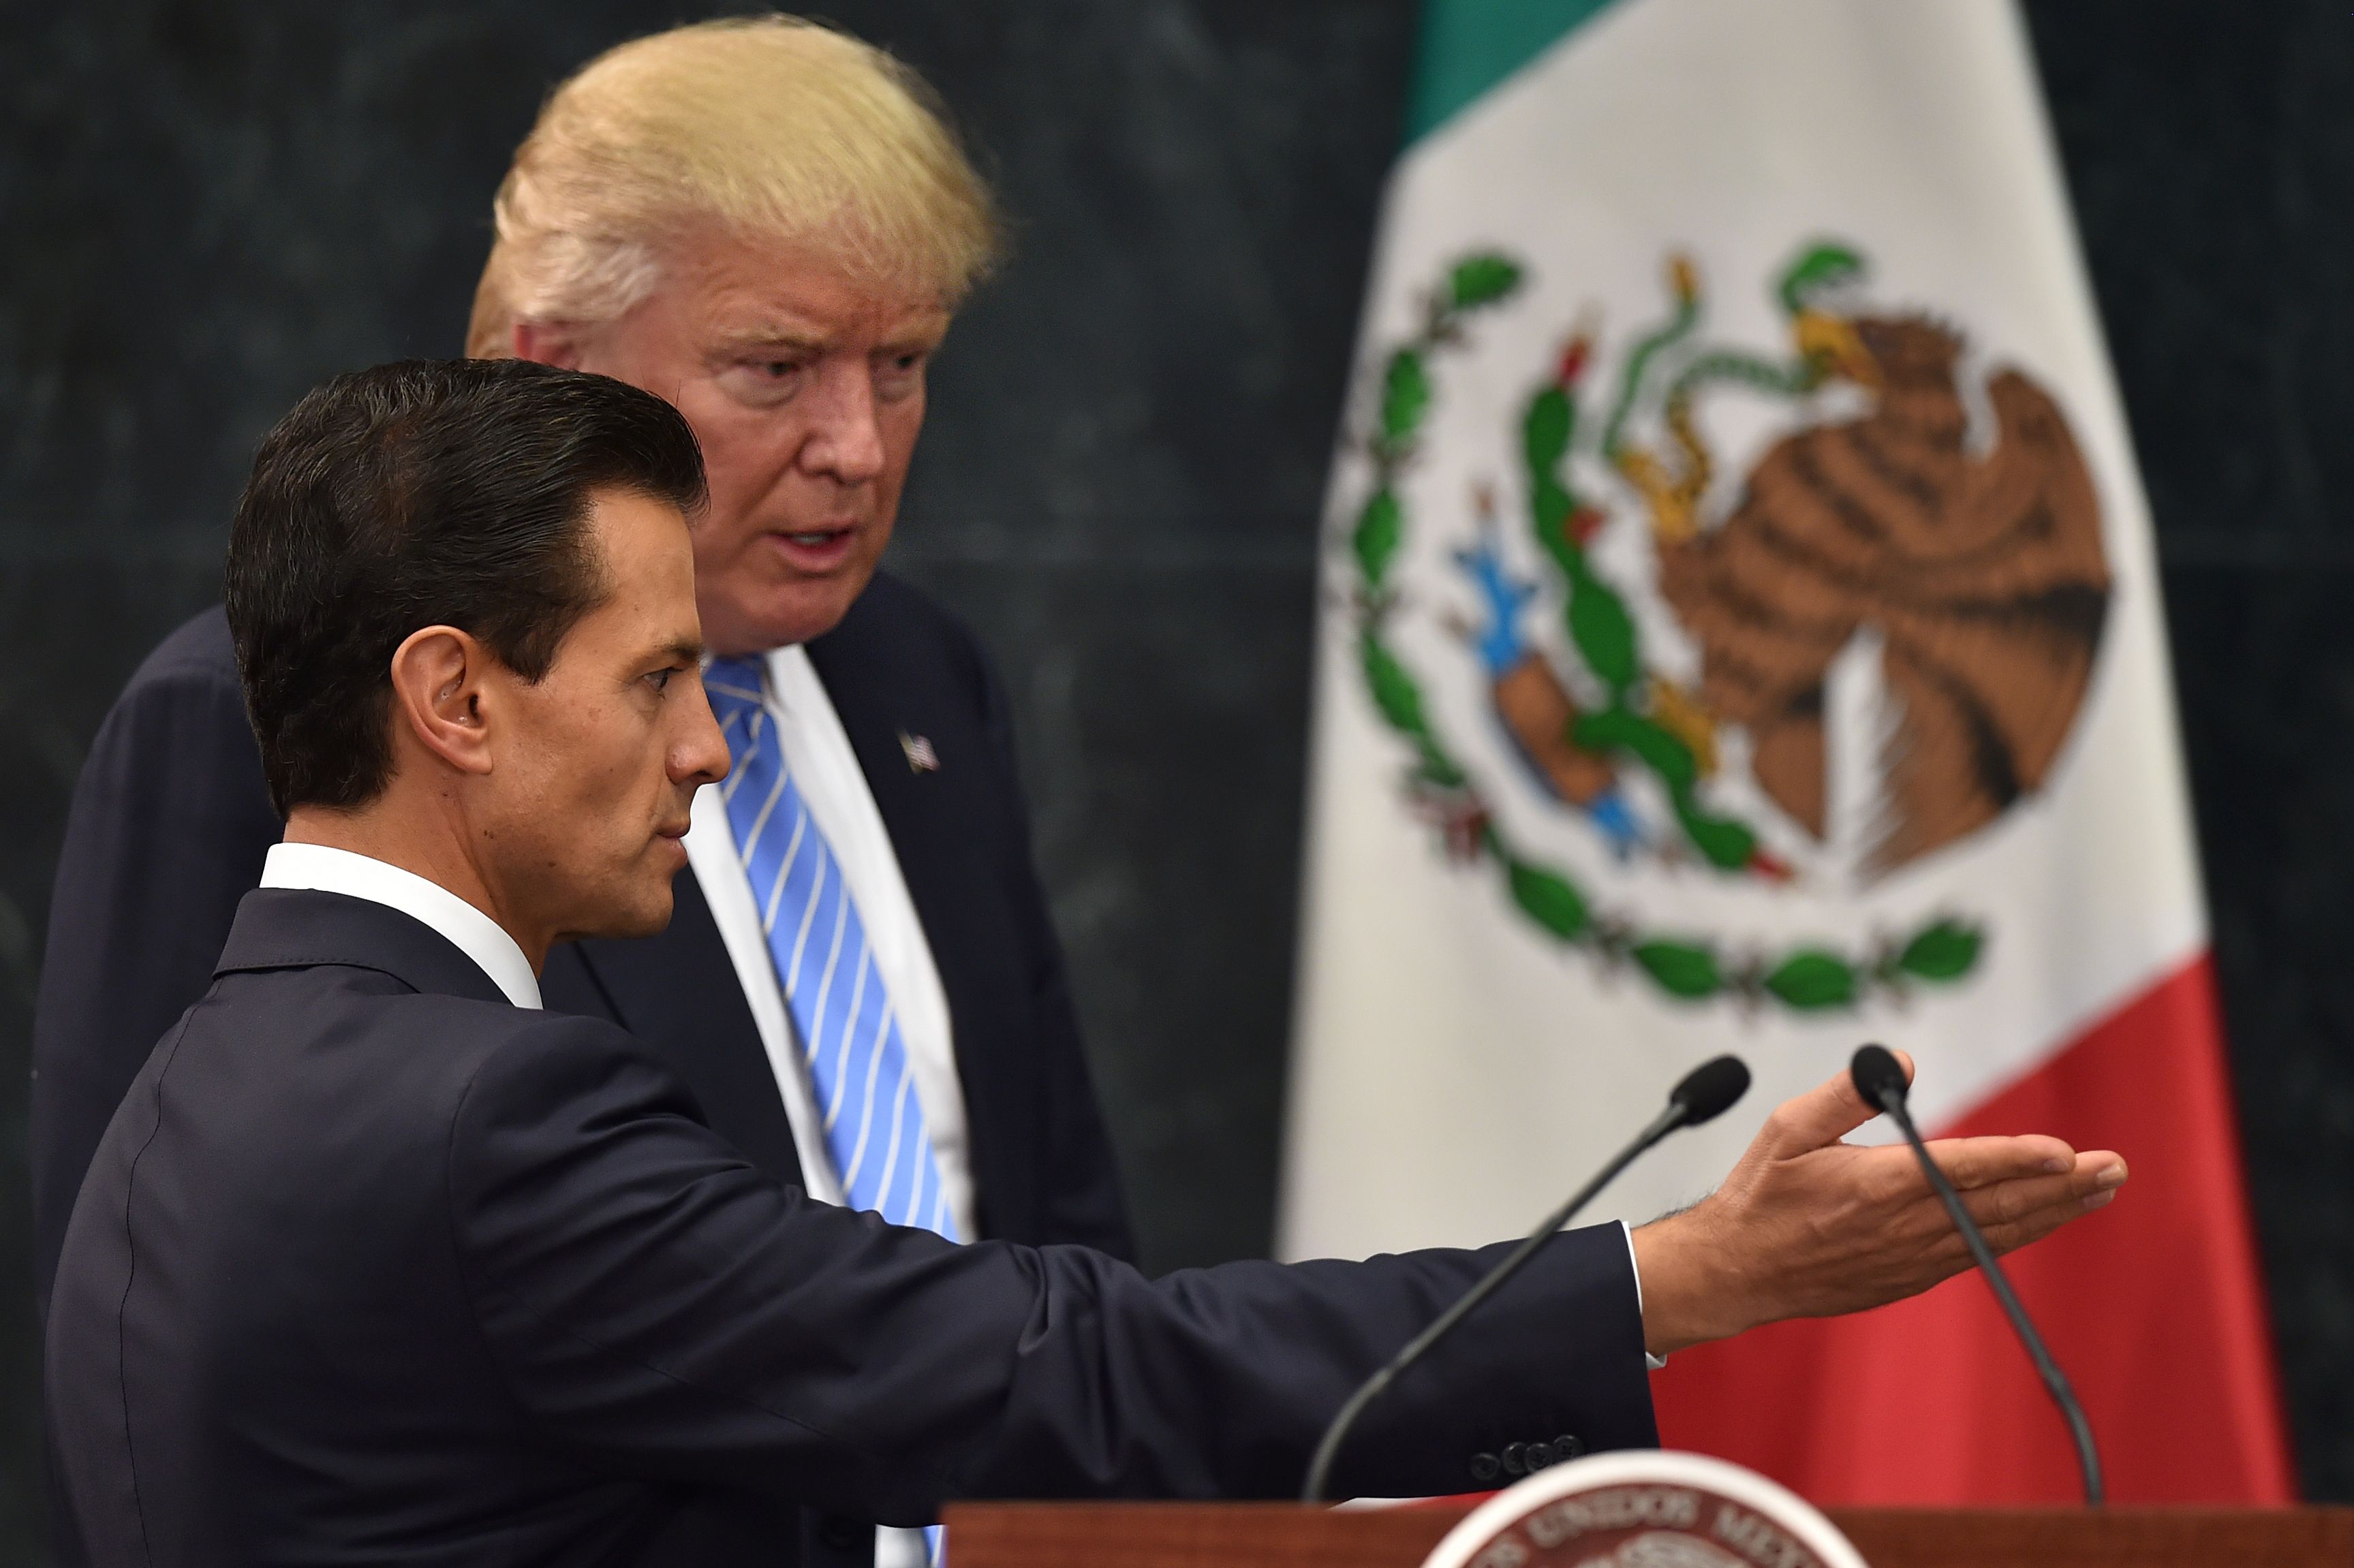 US presidential candidate Donald Trump (R) and Mexican President Enrique Pena Nieto prepare to deliver a joint press conference in Mexico City on August 31, 2016. Donald Trump was expected in Mexico Wednesday to meet its president, in a move aimed at showing that despite the Republican White House hopeful's hardline opposition to illegal immigration he is no close-minded xenophobe. Trump stunned the political establishment when he announced late Tuesday that he was making the surprise trip south of the border to meet with President Enrique Pena Nieto, a sharp Trump critic. / AFP PHOTO / YURI CORTEZYURI CORTEZ/AFP/Getty Images ** OUTS - ELSENT, FPG, CM - OUTS * NM, PH, VA if sourced by CT, LA or MoD **